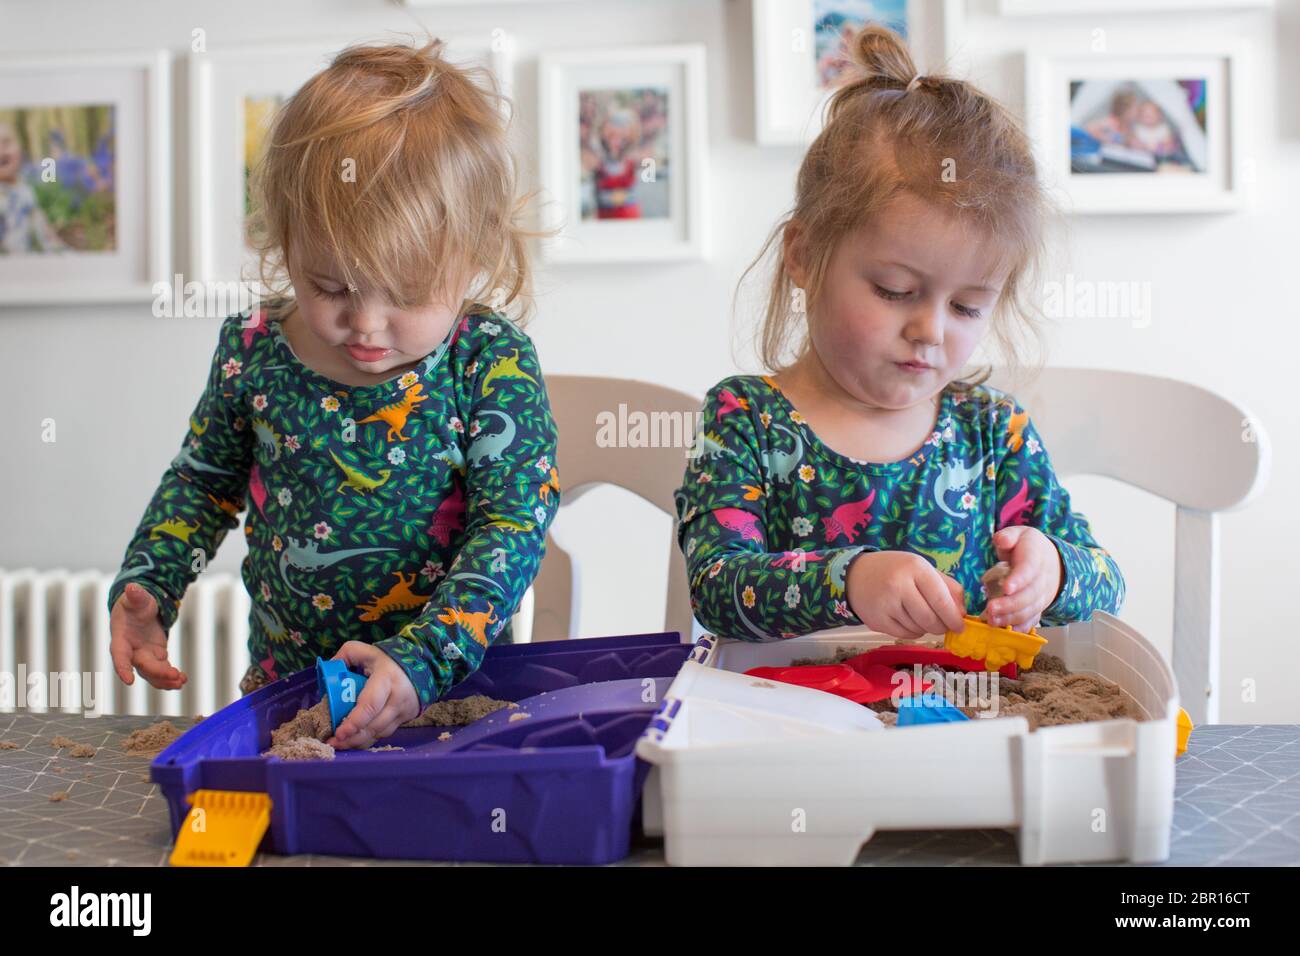 Two young children playing indoors at the table with a sand box, UK Stock Photo